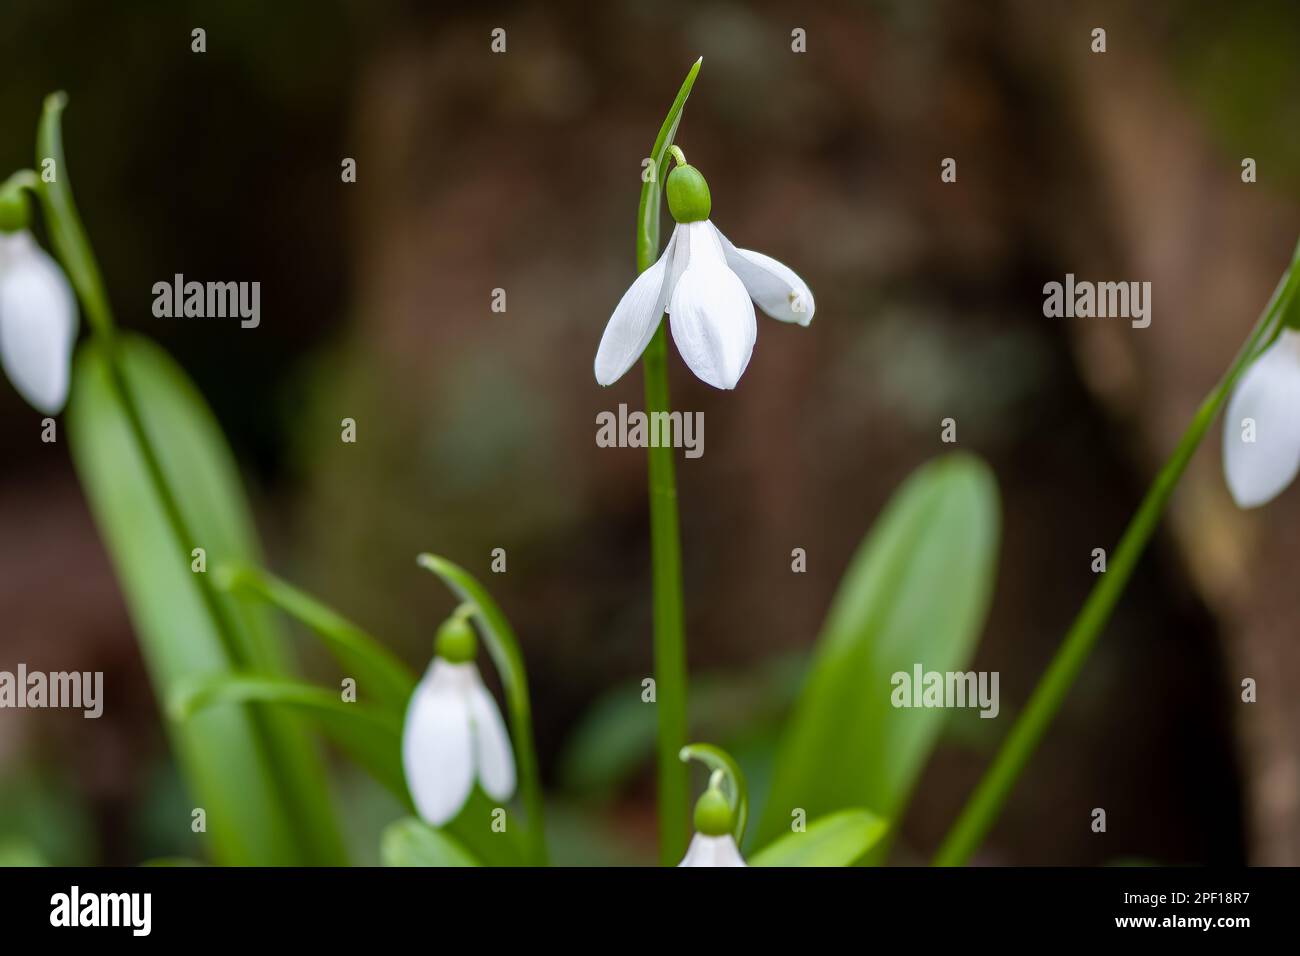 White bell shaped flowers of Snowdrops Galanthus nivalis Stock Photo